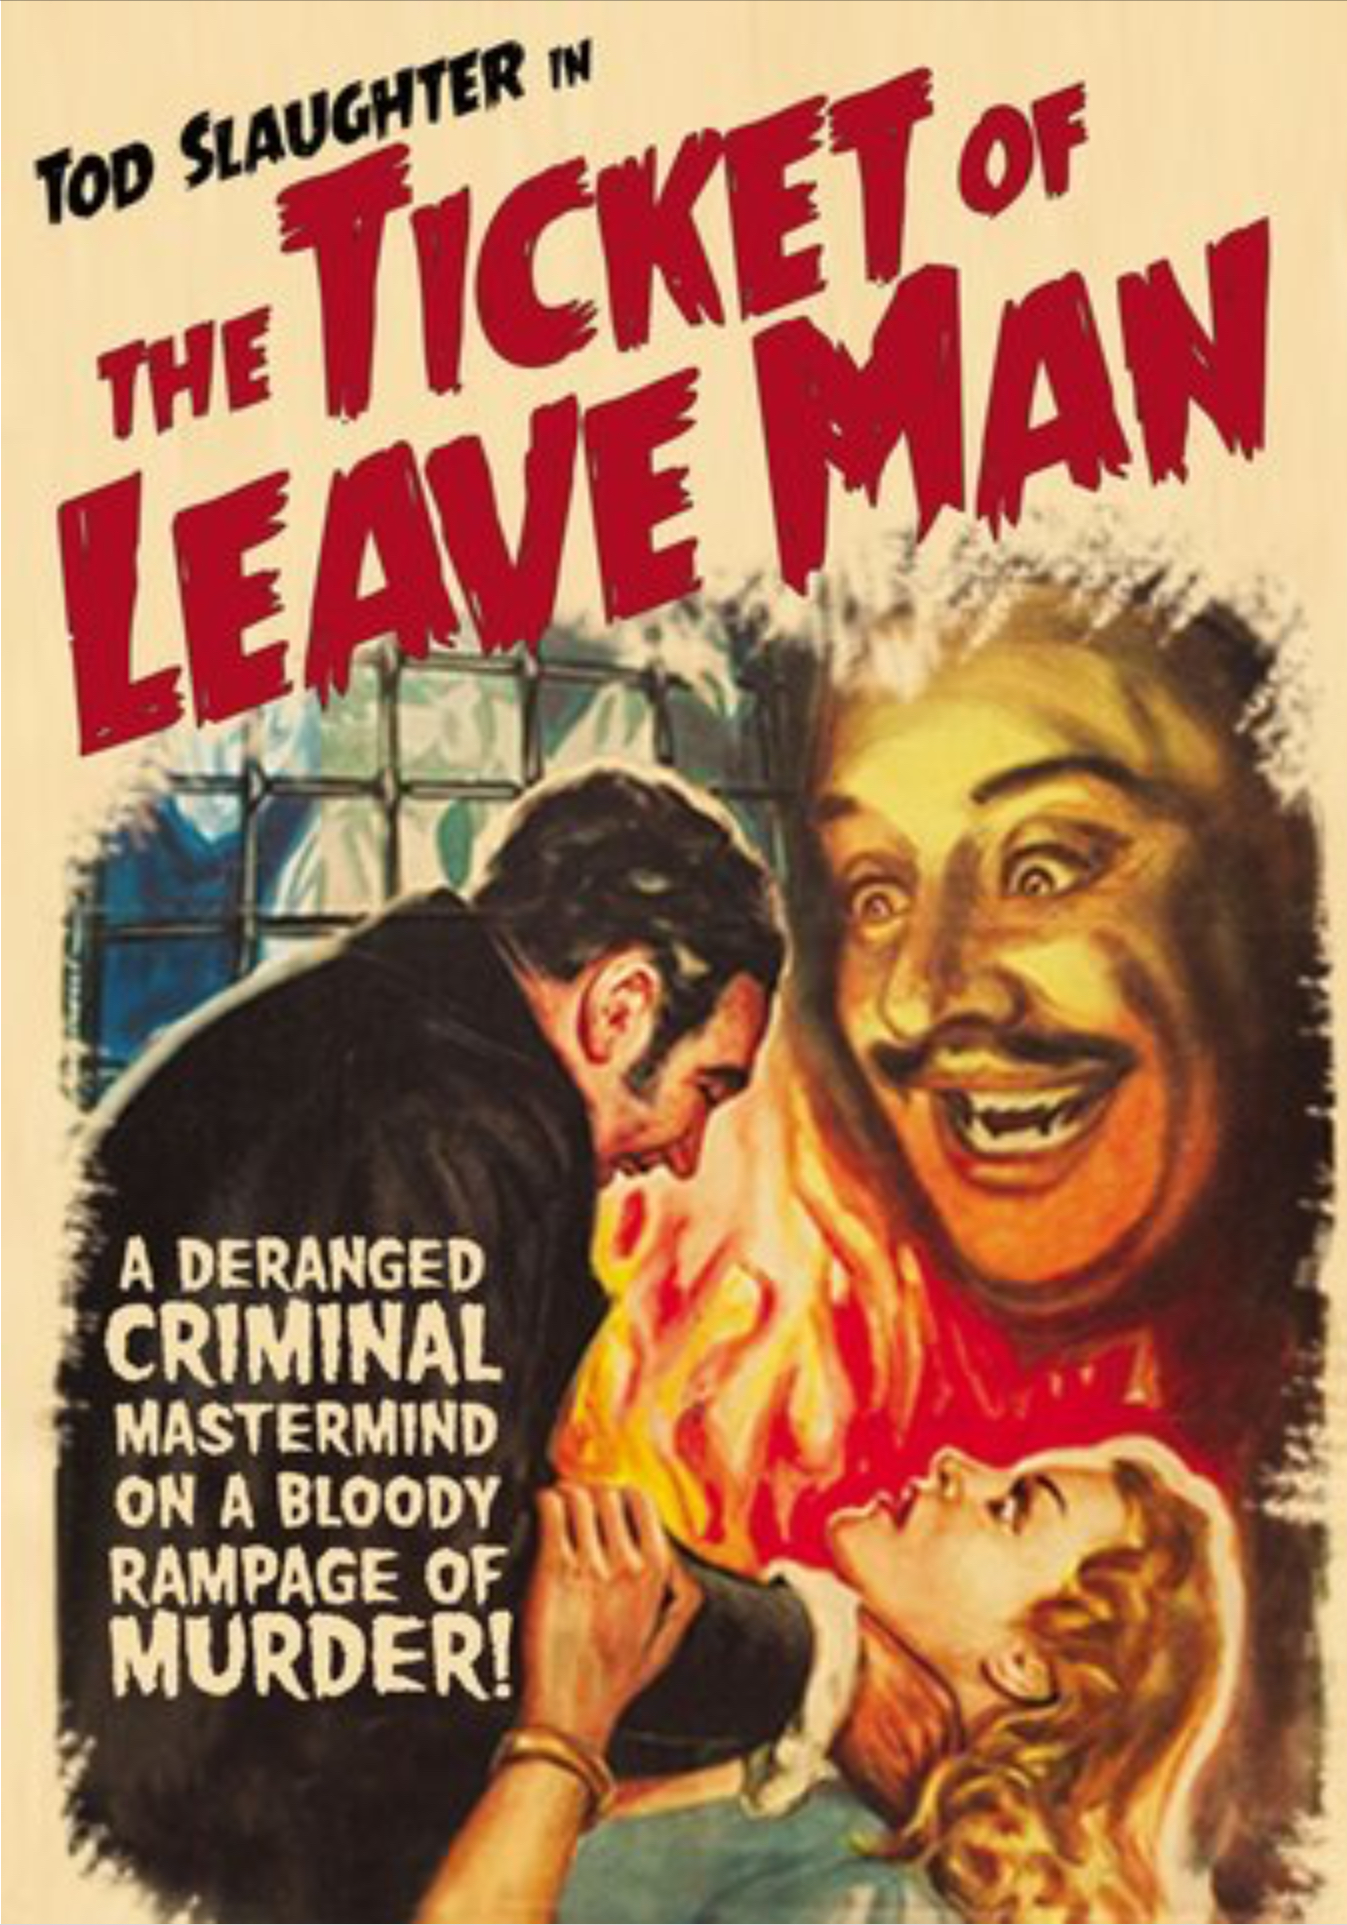 The Ticket of Leave Man (1937) Screenshot 4